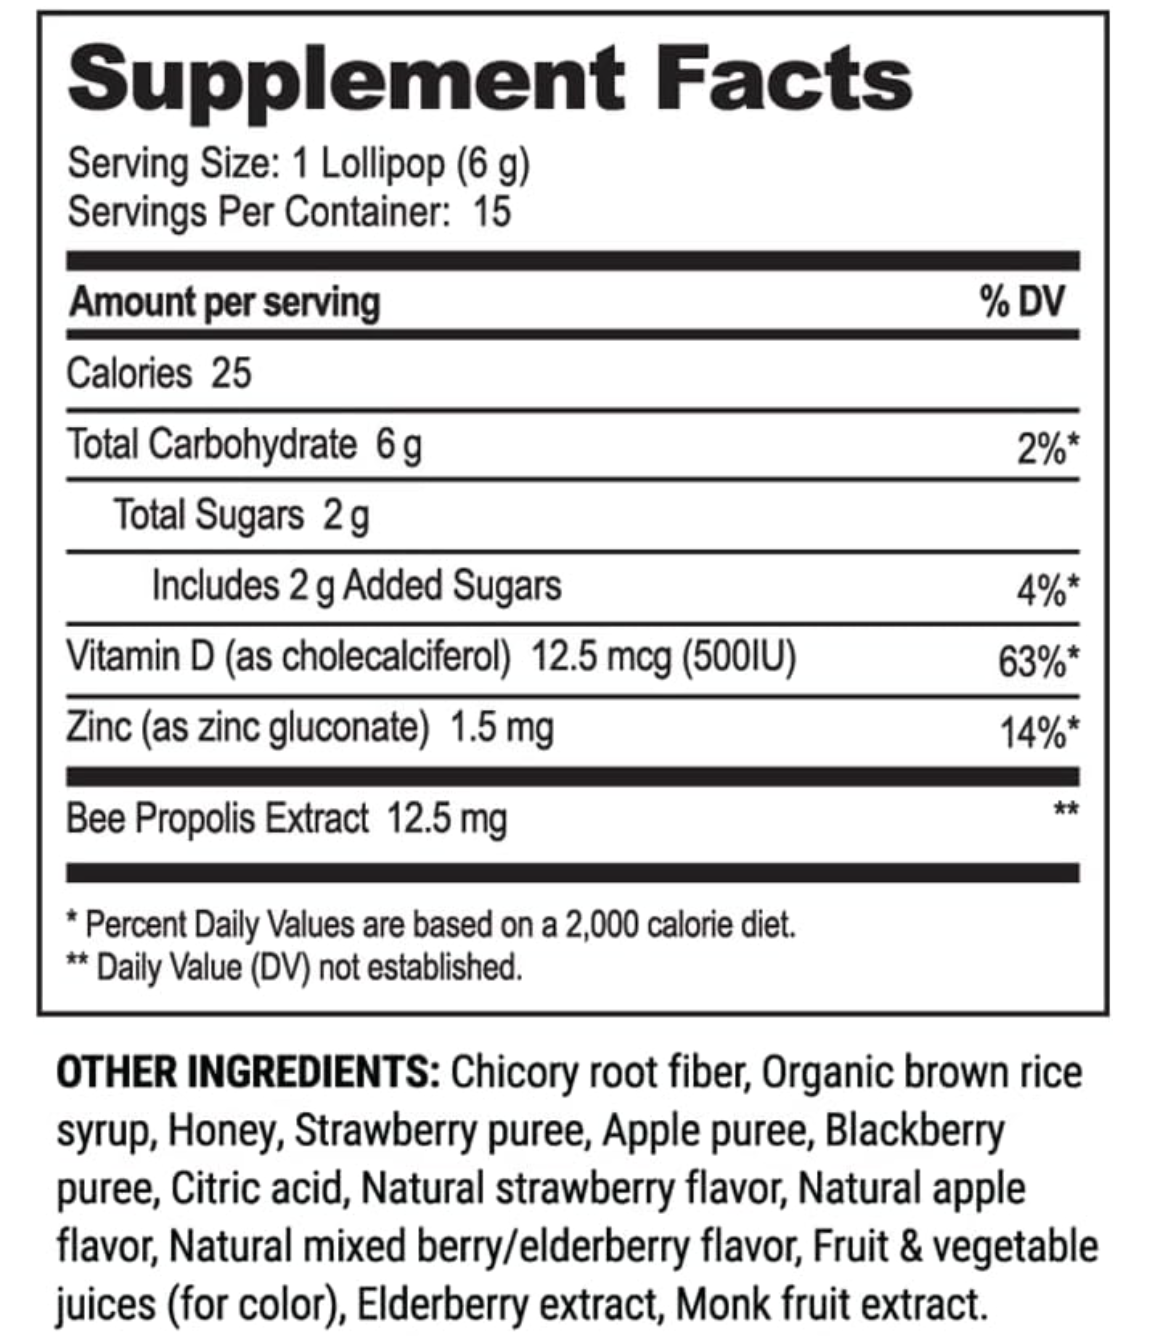 Kids Throat Soothing Lollipops by Beekeeper's Naturals - Doctor Formulated Immune Support, Vitamin D & Honey, Under 2g Sugar, Clean Ingredients,15 ct